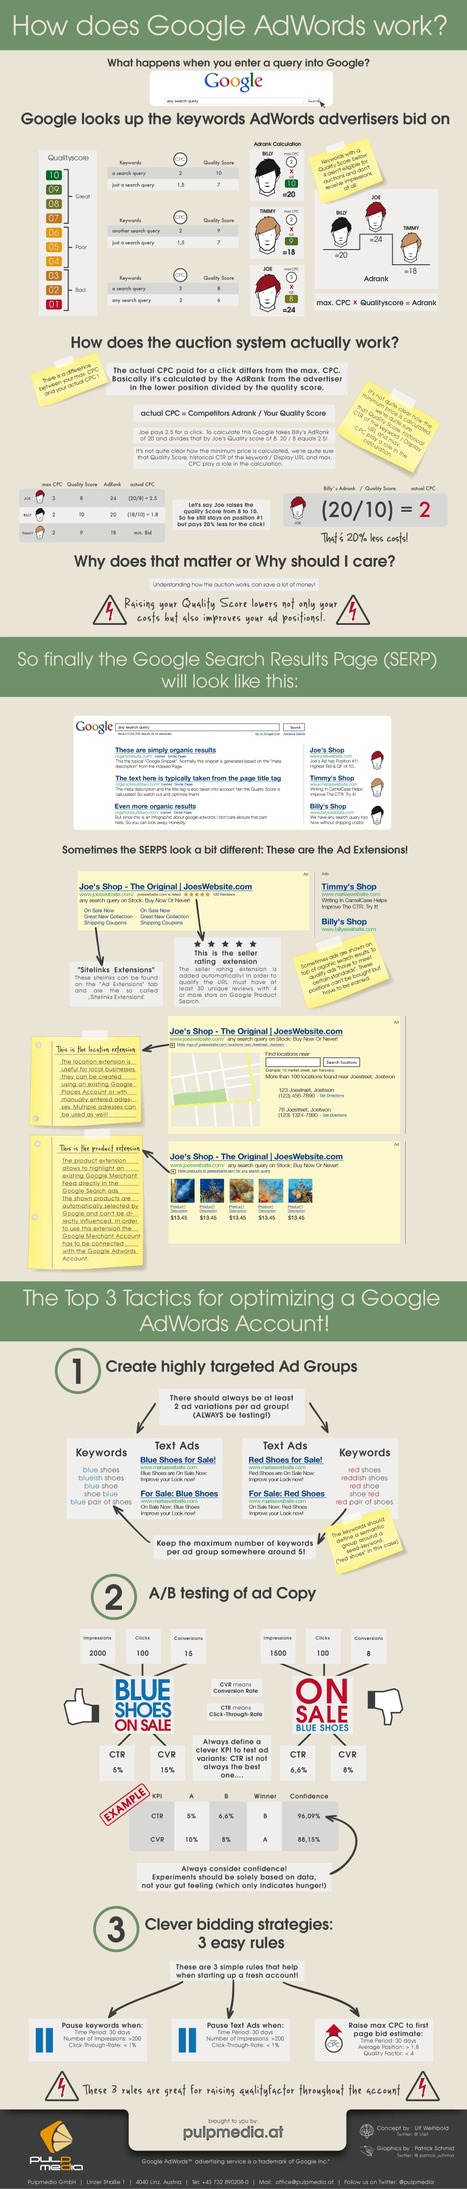 How Does Google AdWords Work [Infographic] | Time to Learn | Scoop.it